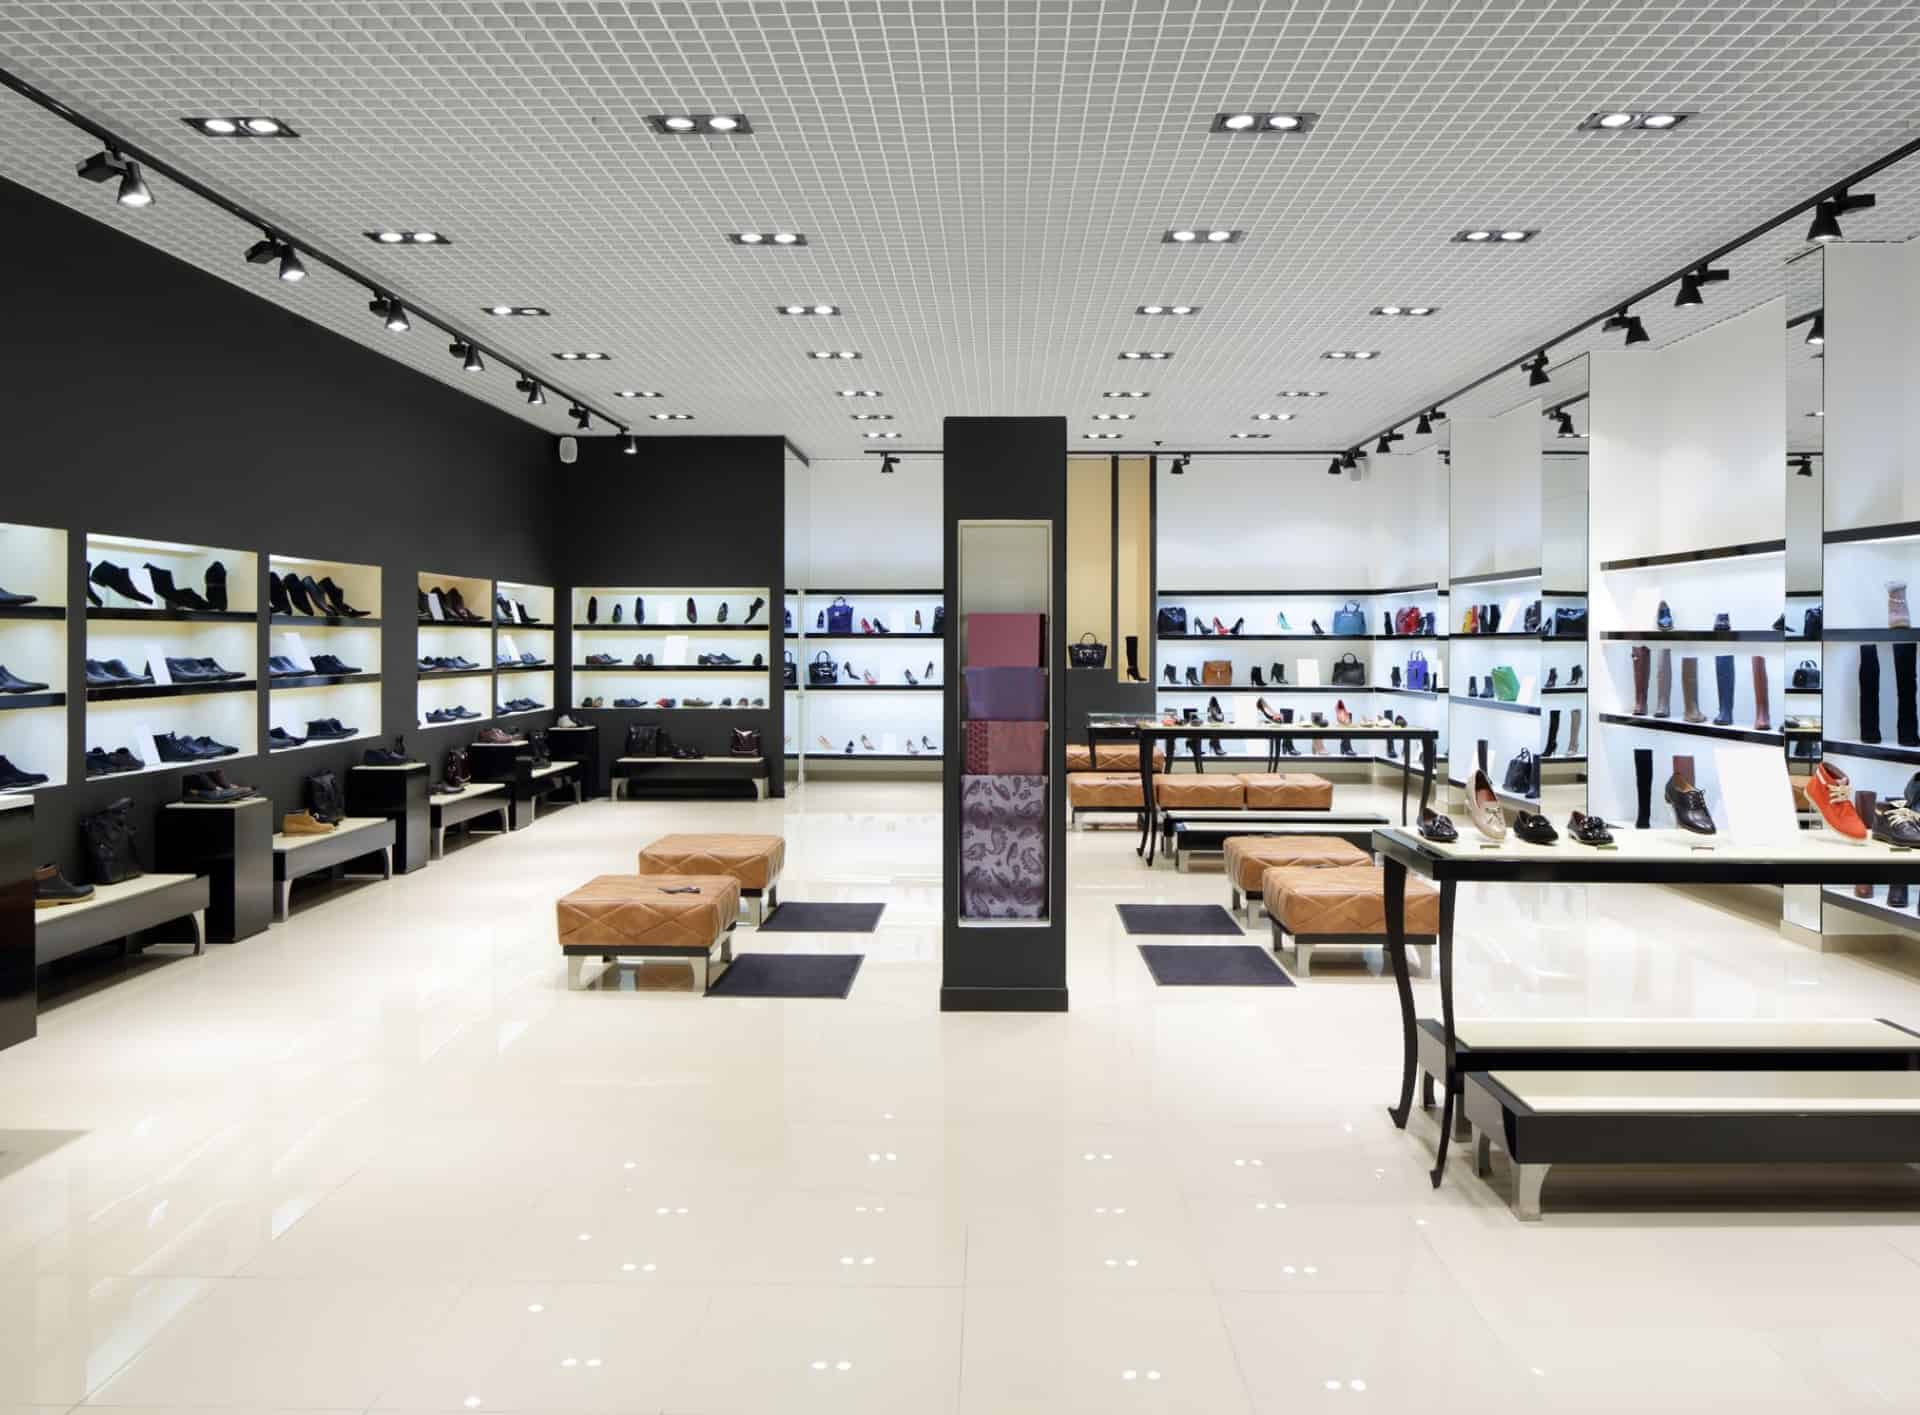 shoes shop design in india